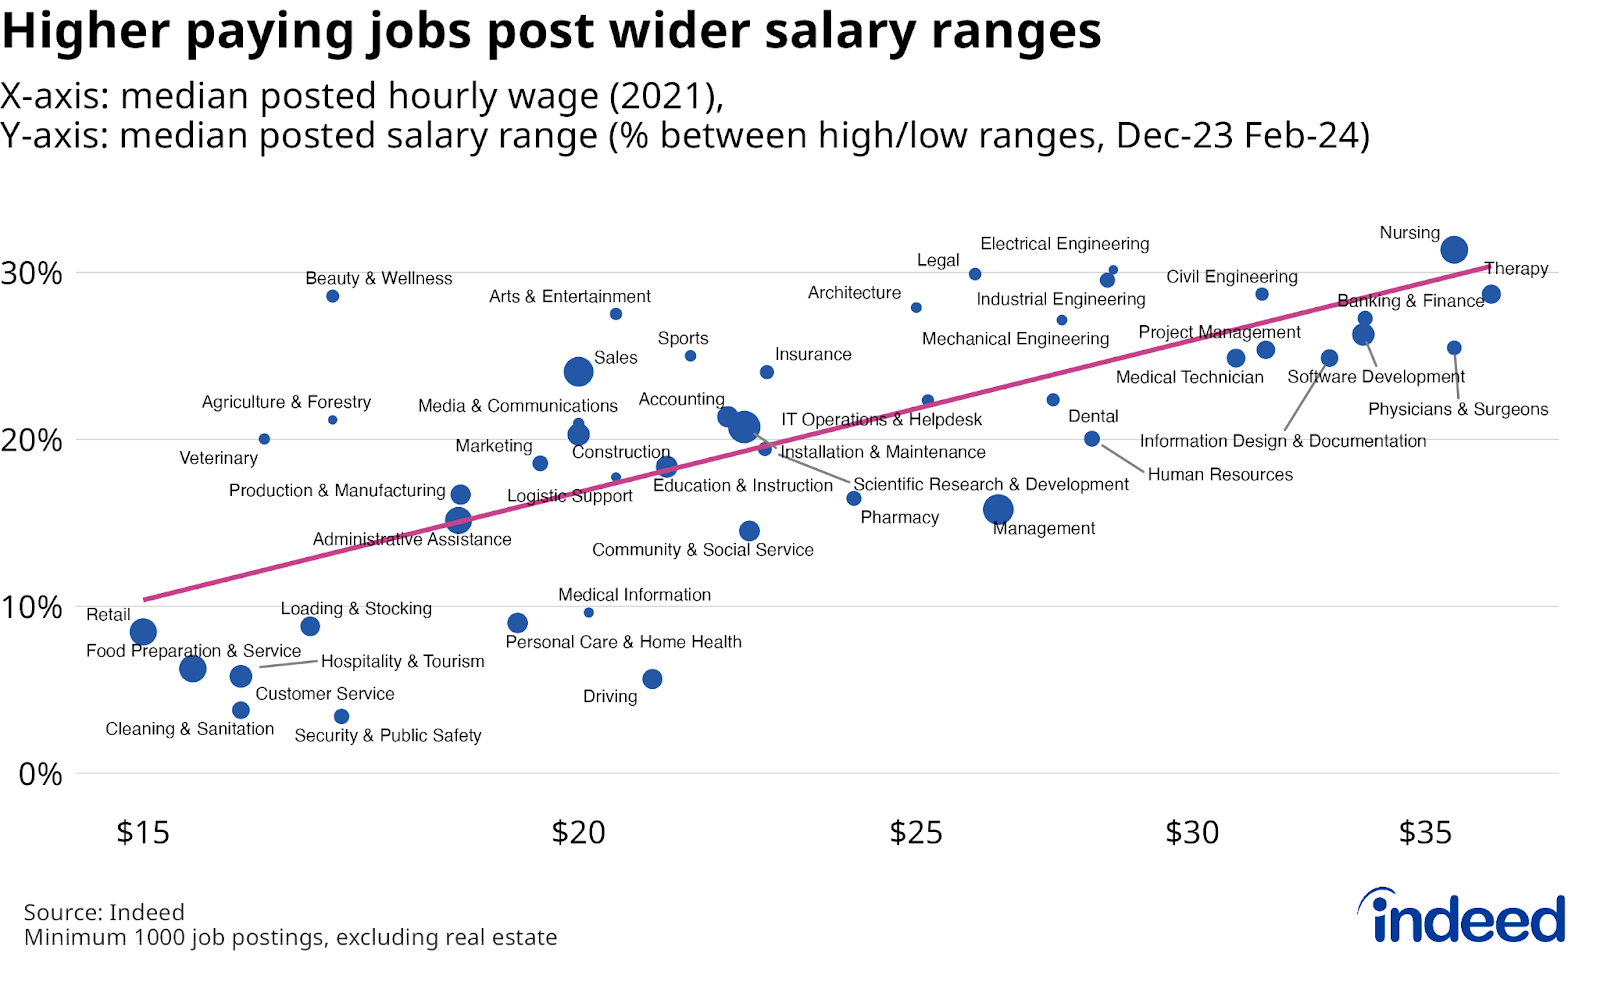 Scatterplot titled “Higher paying jobs post wider salary ranges,” with the x-axis representing the median posted wage in 2021 by occupation, and the y-axis representing the median posted wage range in February 2024. There is a strong positive correlation between the two variables.